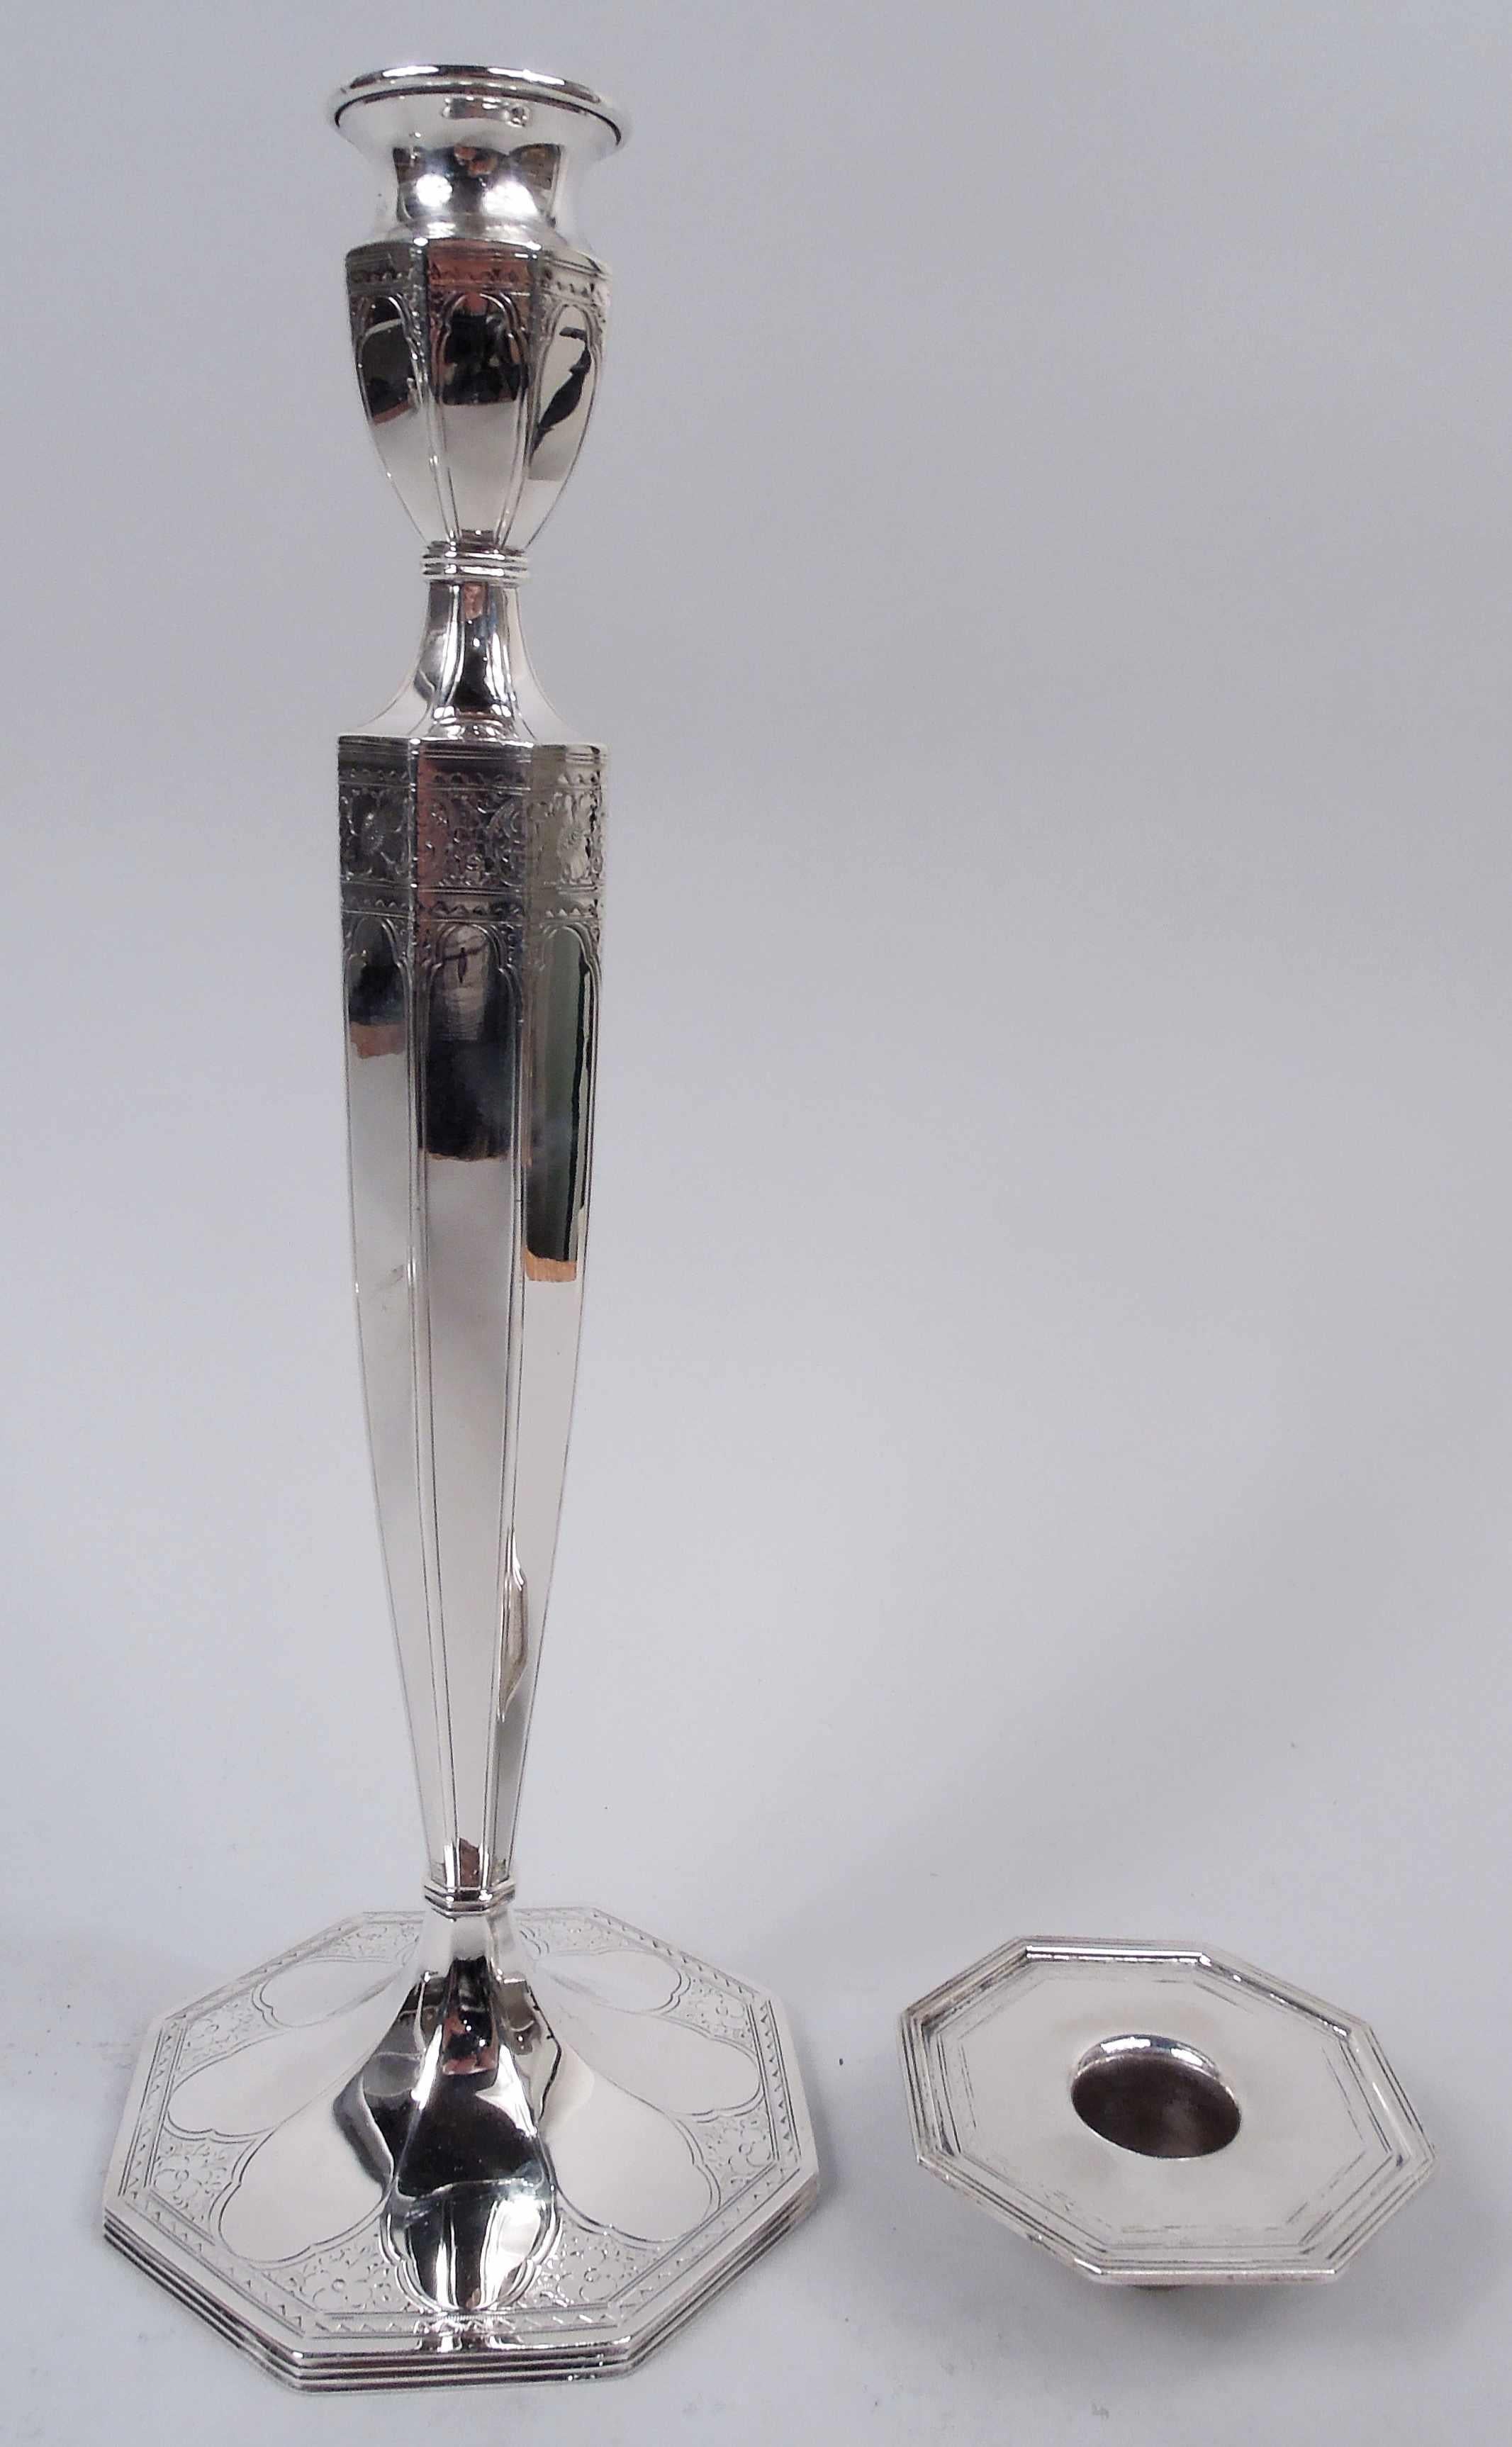 Pair of Edwardian Classical sterling silver candlesticks. Made by Barbour Silver Co. (part of International) in Hartford, ca 1910. Each: Tapering socket with flat and detachable bobeche; raised foot. Faceted. Engraved floral and zigzag bands. Lobed